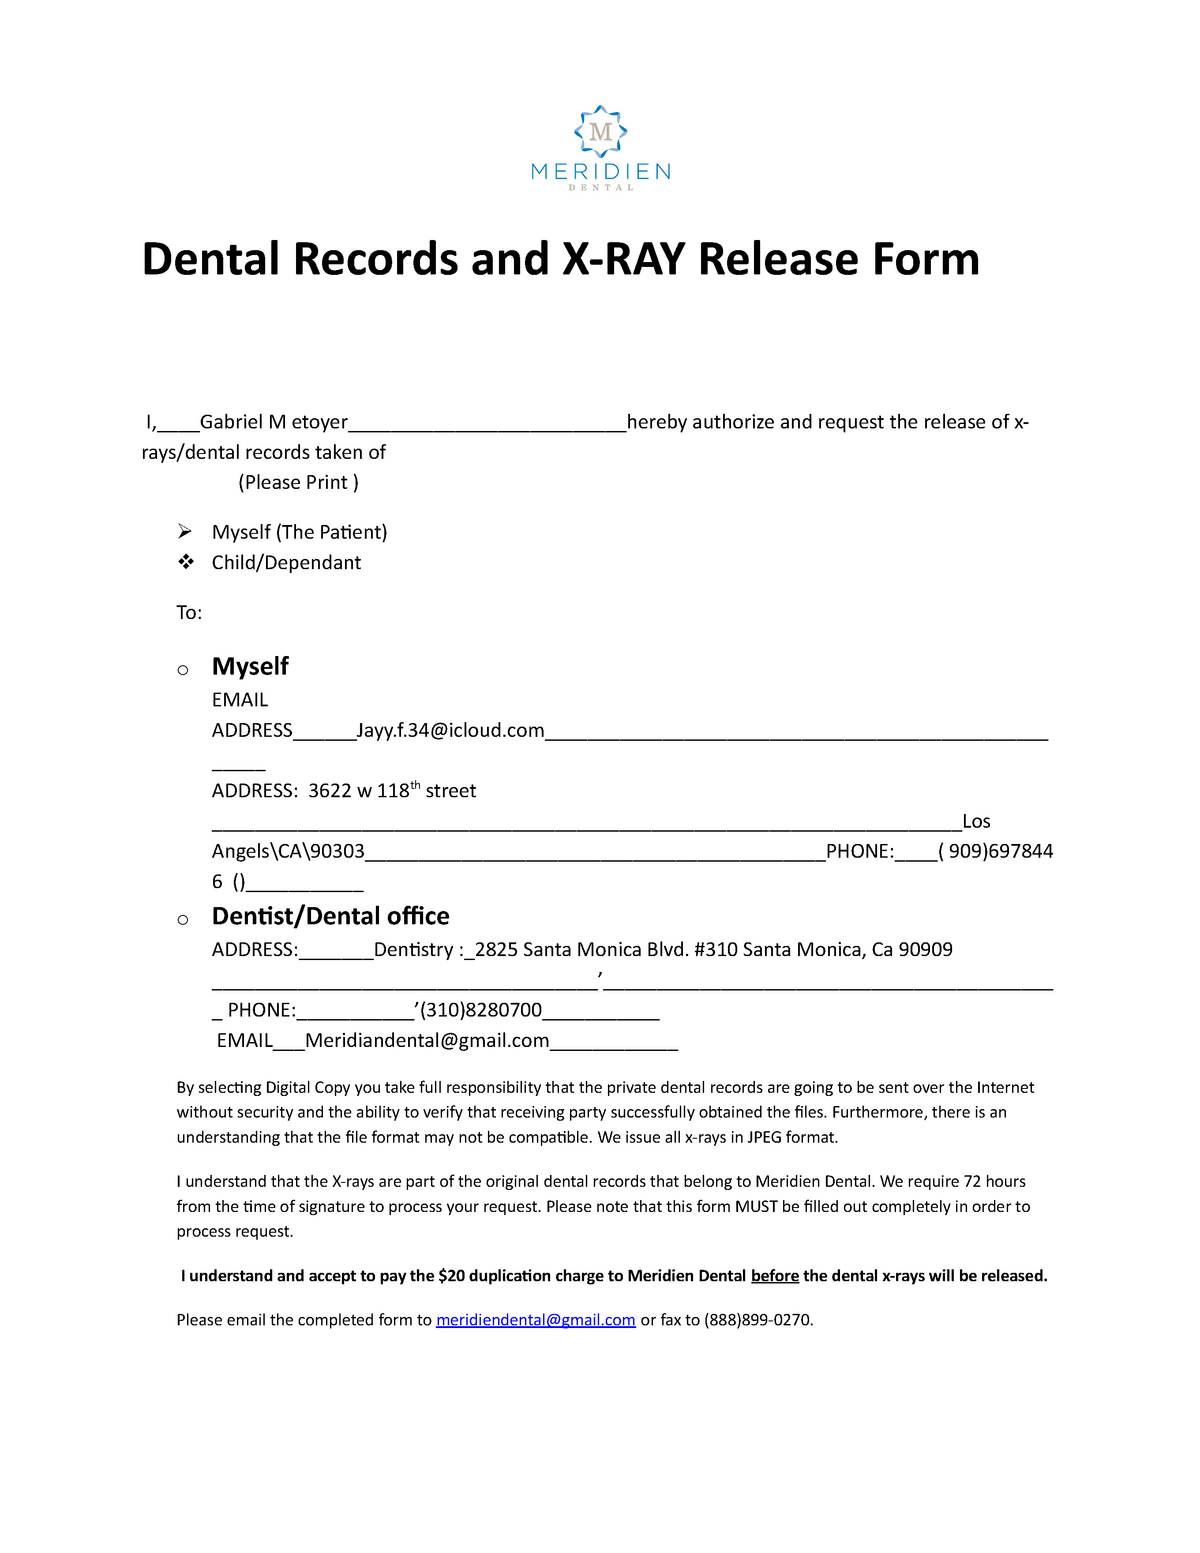 release-consent-form-copy-dental-records-and-x-ray-release-form-i